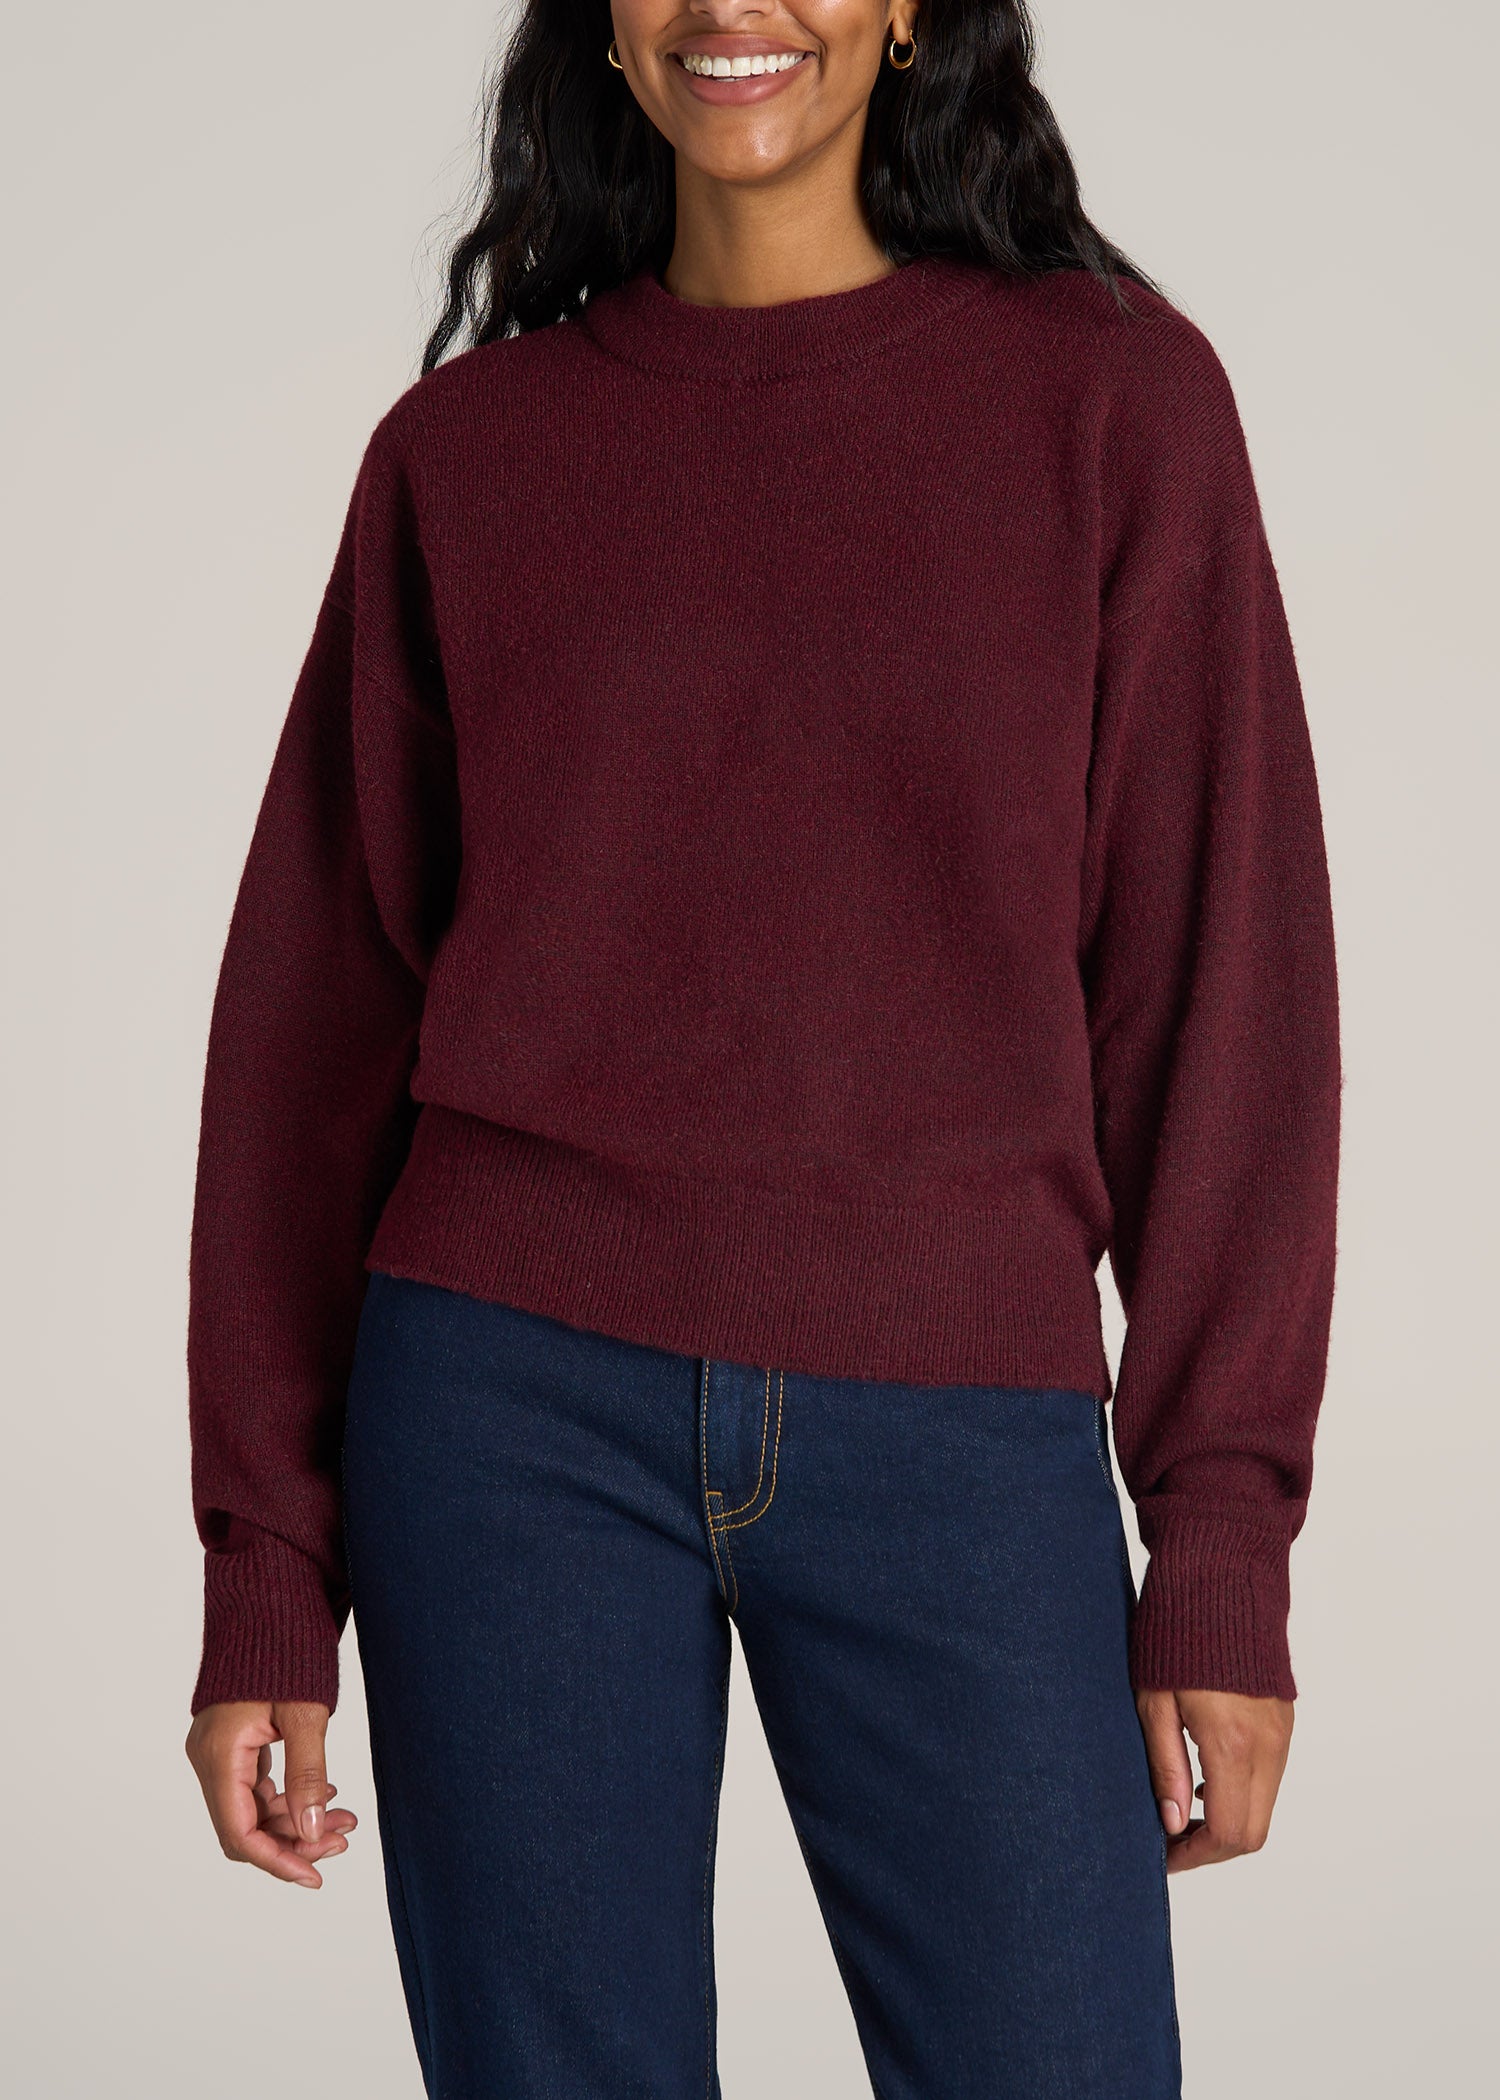 Knox Rose Women's Plus Size Crewneck Pointelle Sweater (Cherry Red, 2X) at   Women's Clothing store